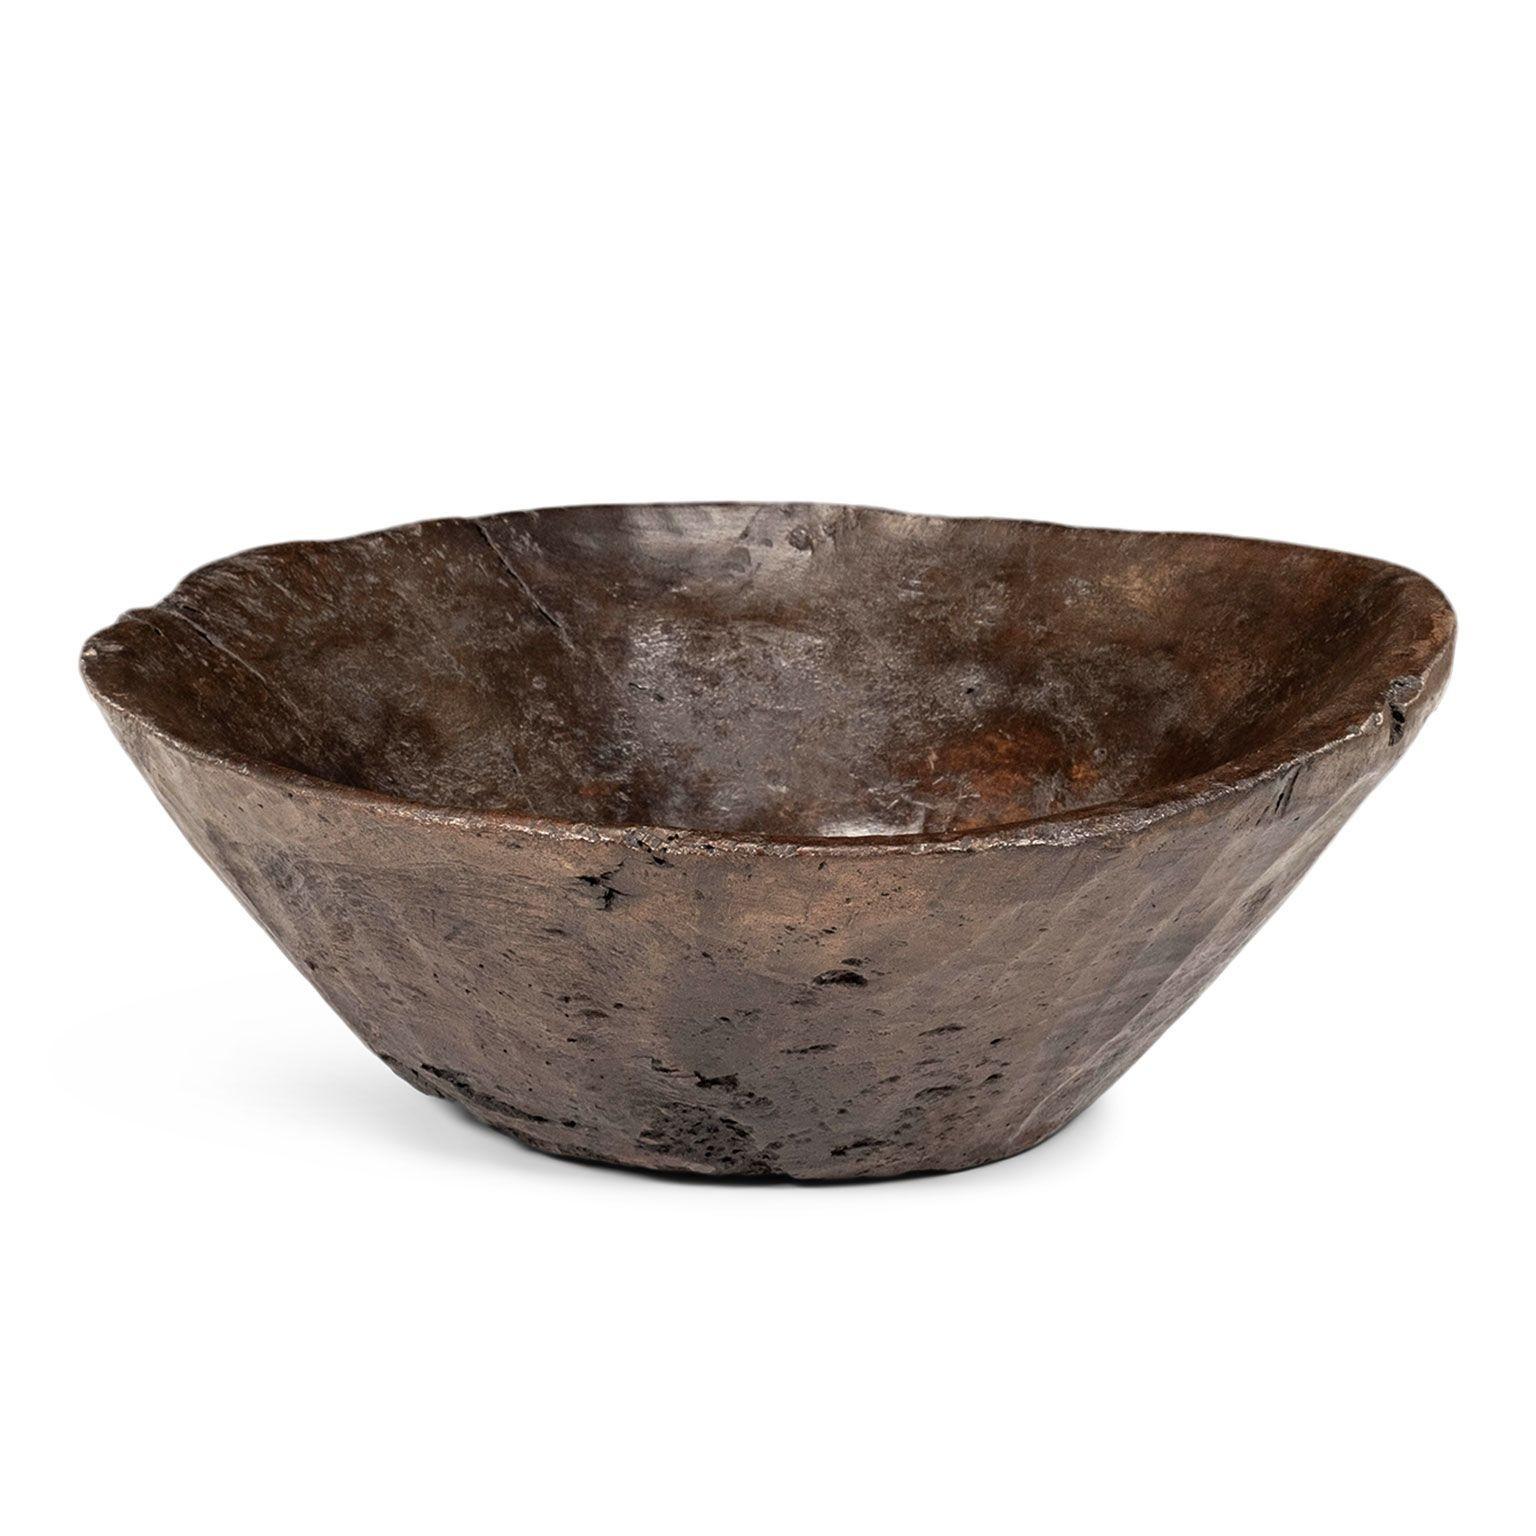 Large primitive bowl hand-carved from hardwood.

Note: Due to regional changes in humidity and climate during shipping, antique wood may shrink and/or split along its grain, veneer may loosen or peel, and painted finishes and gilt may flake and